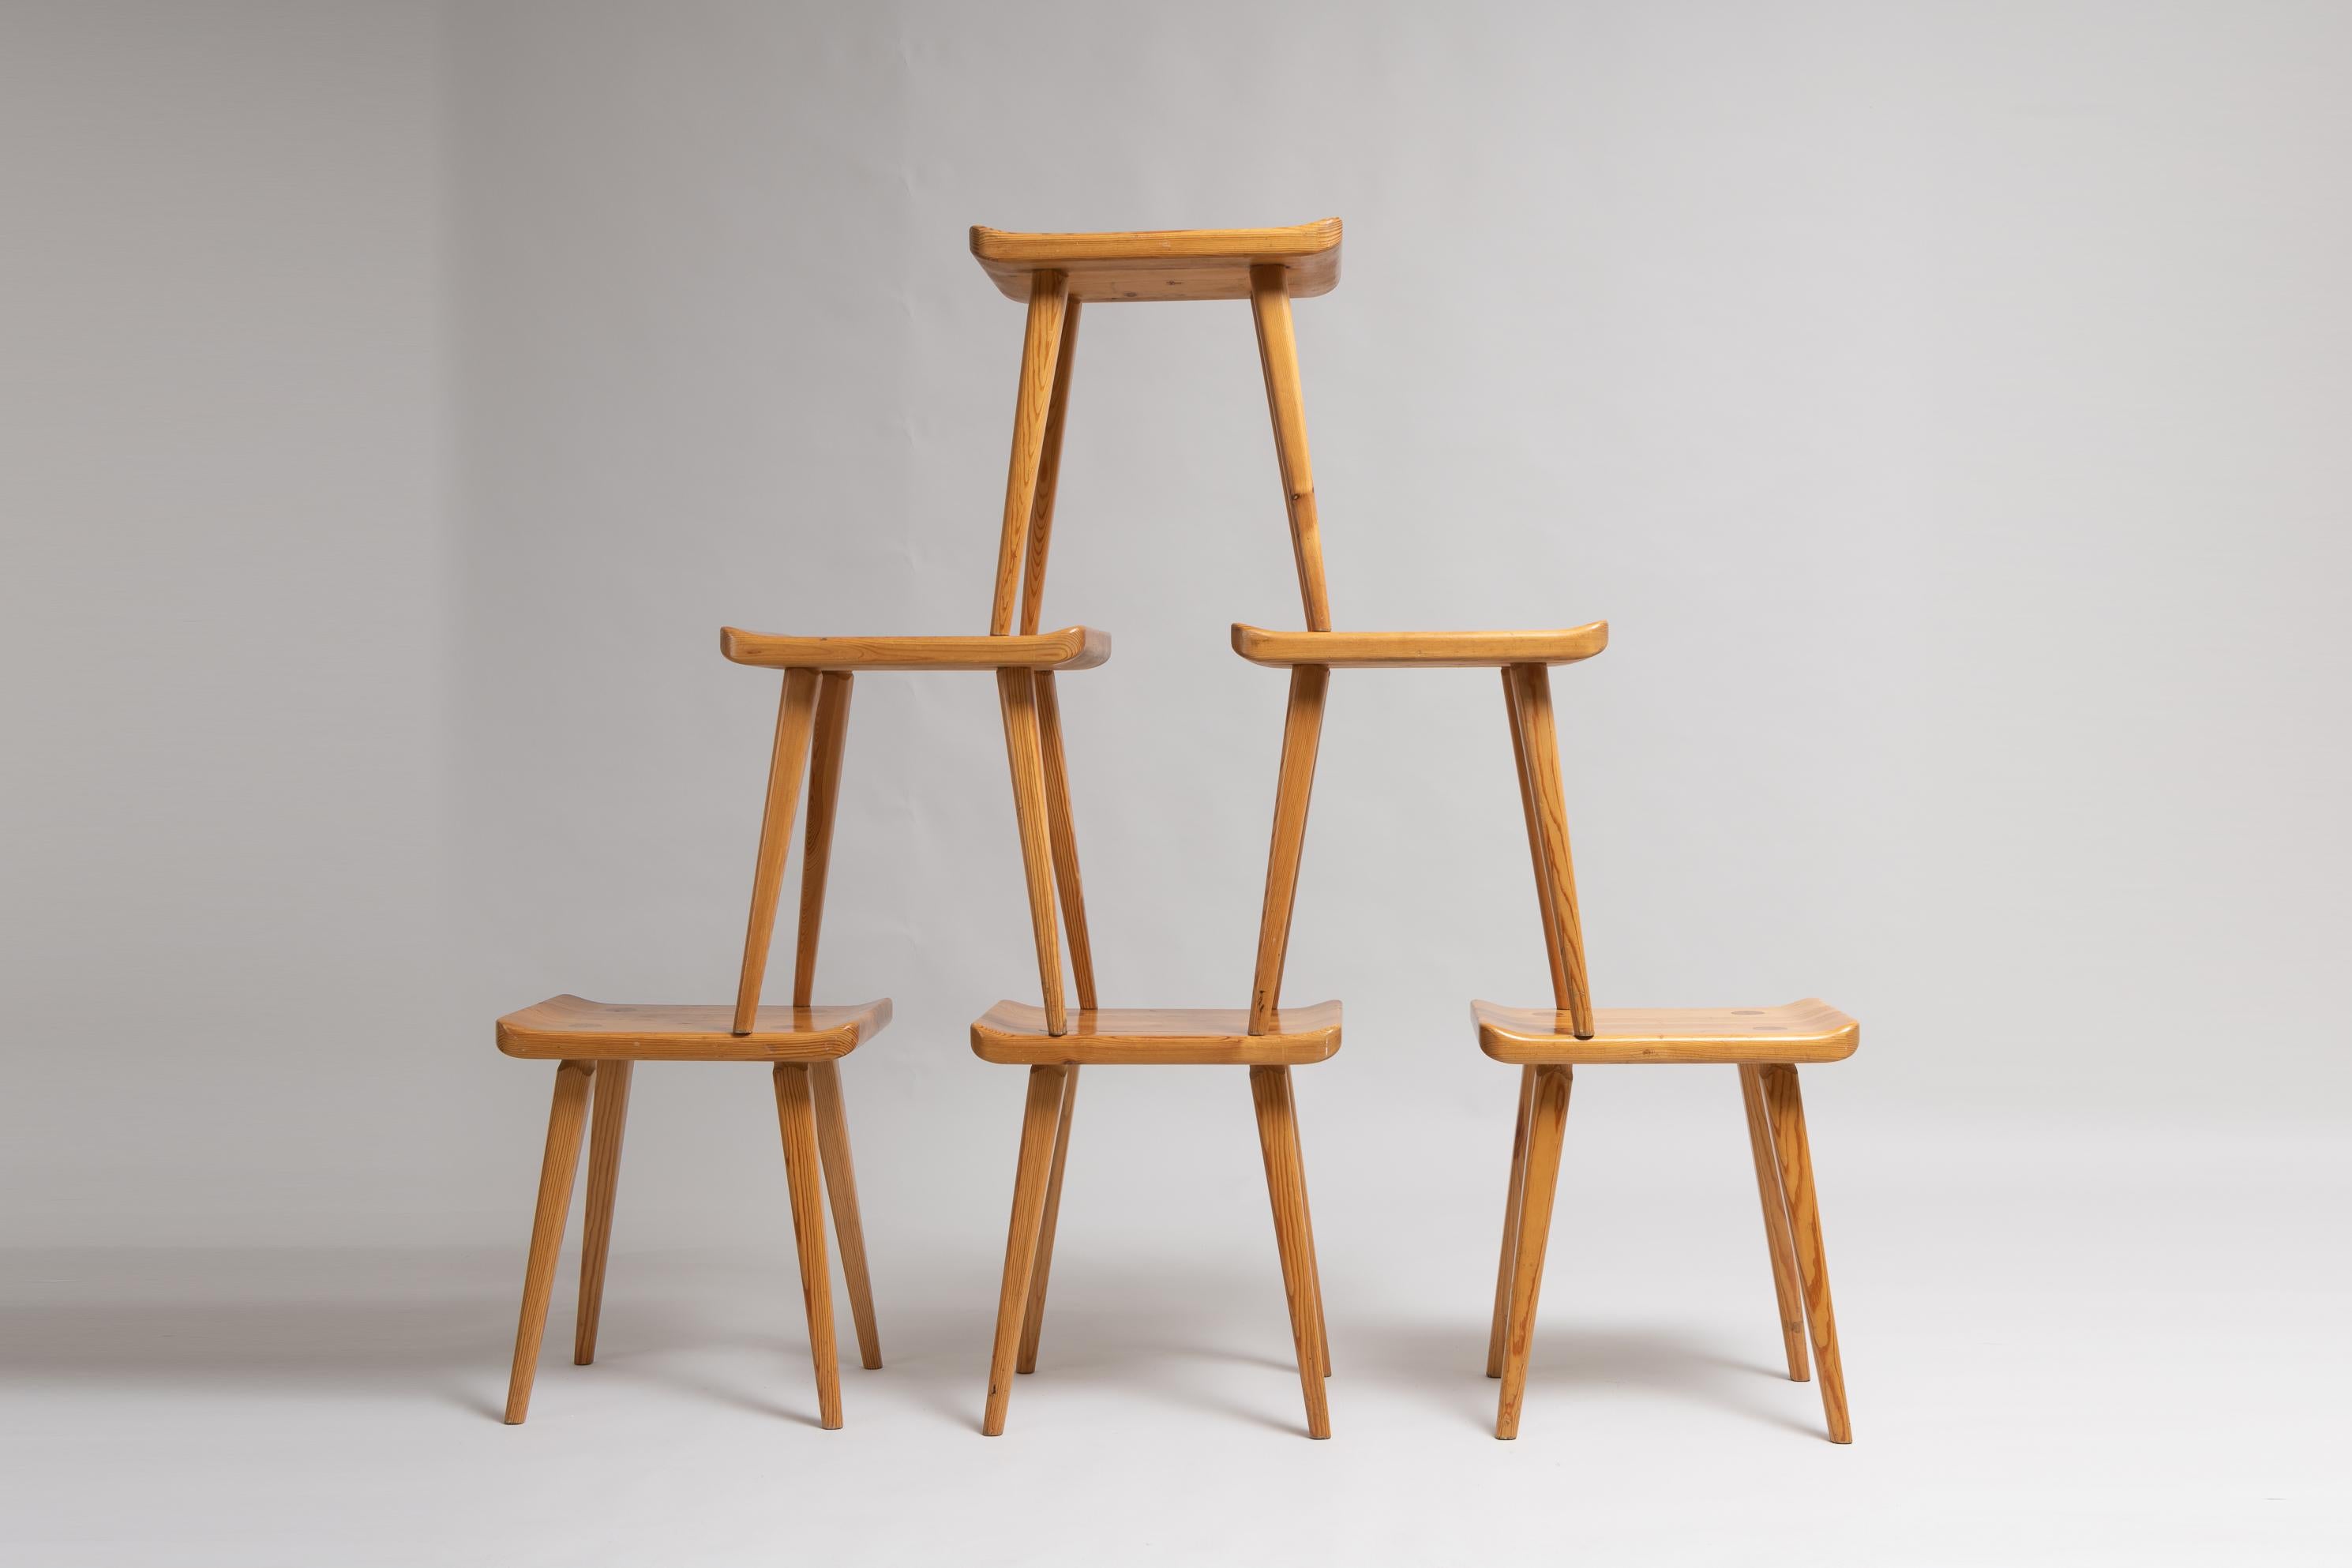 Visingsö stools by Carl Malmsten for Svensk Fur made in solid pine. The stools are minimalistic design with a clean shape and elegantly curved edges. Designed by Carl Malmsten in 1953 these are branded Svensk Fur underneath the seat. Good vintage